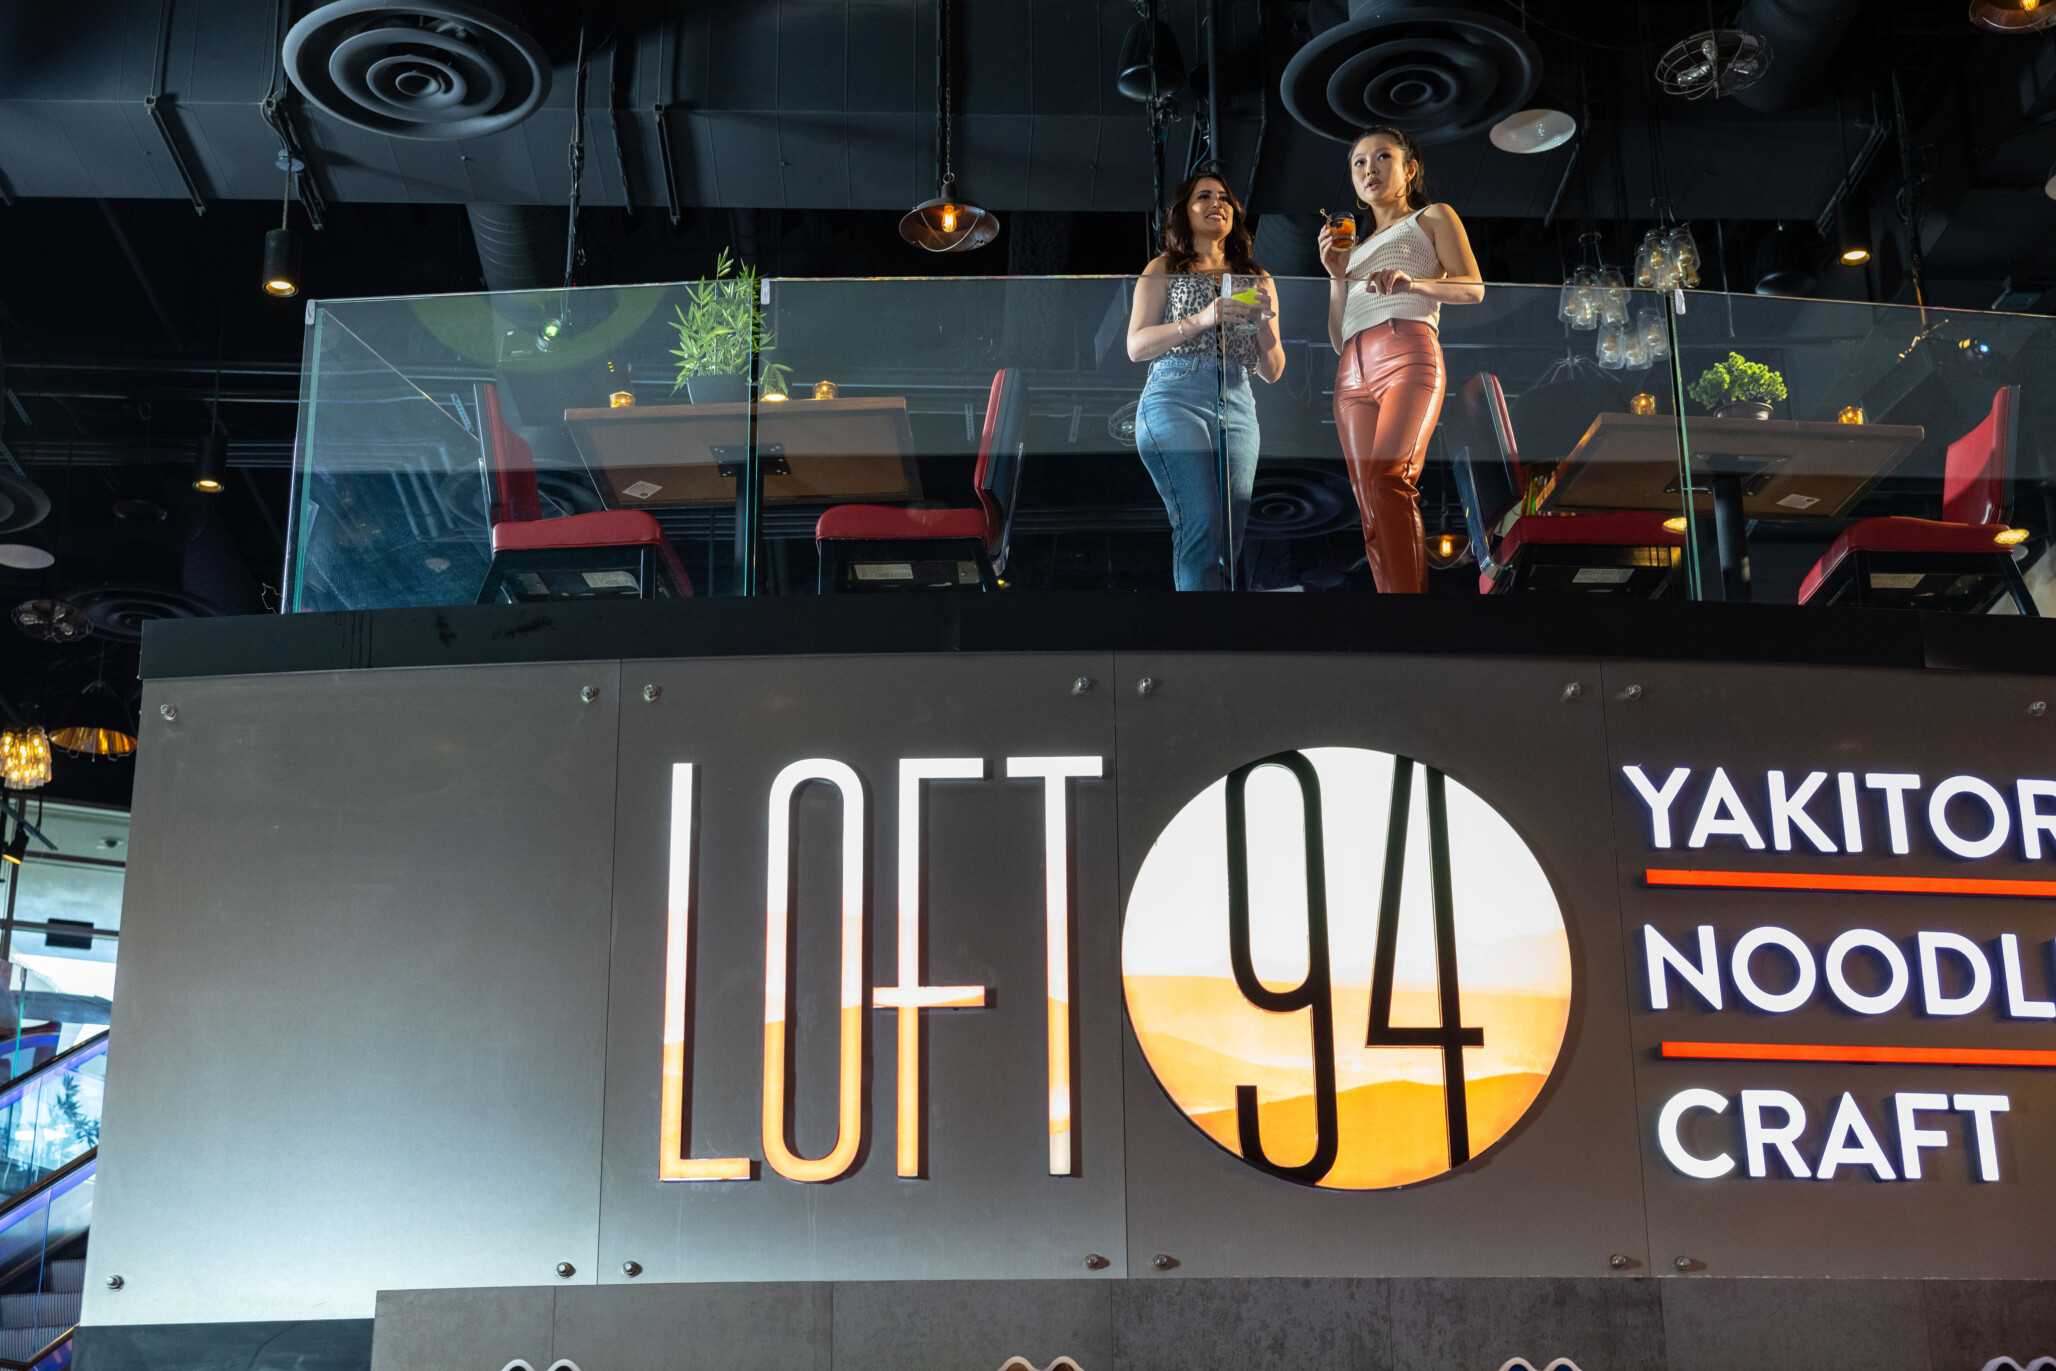 Two women hang out at Loft 94.